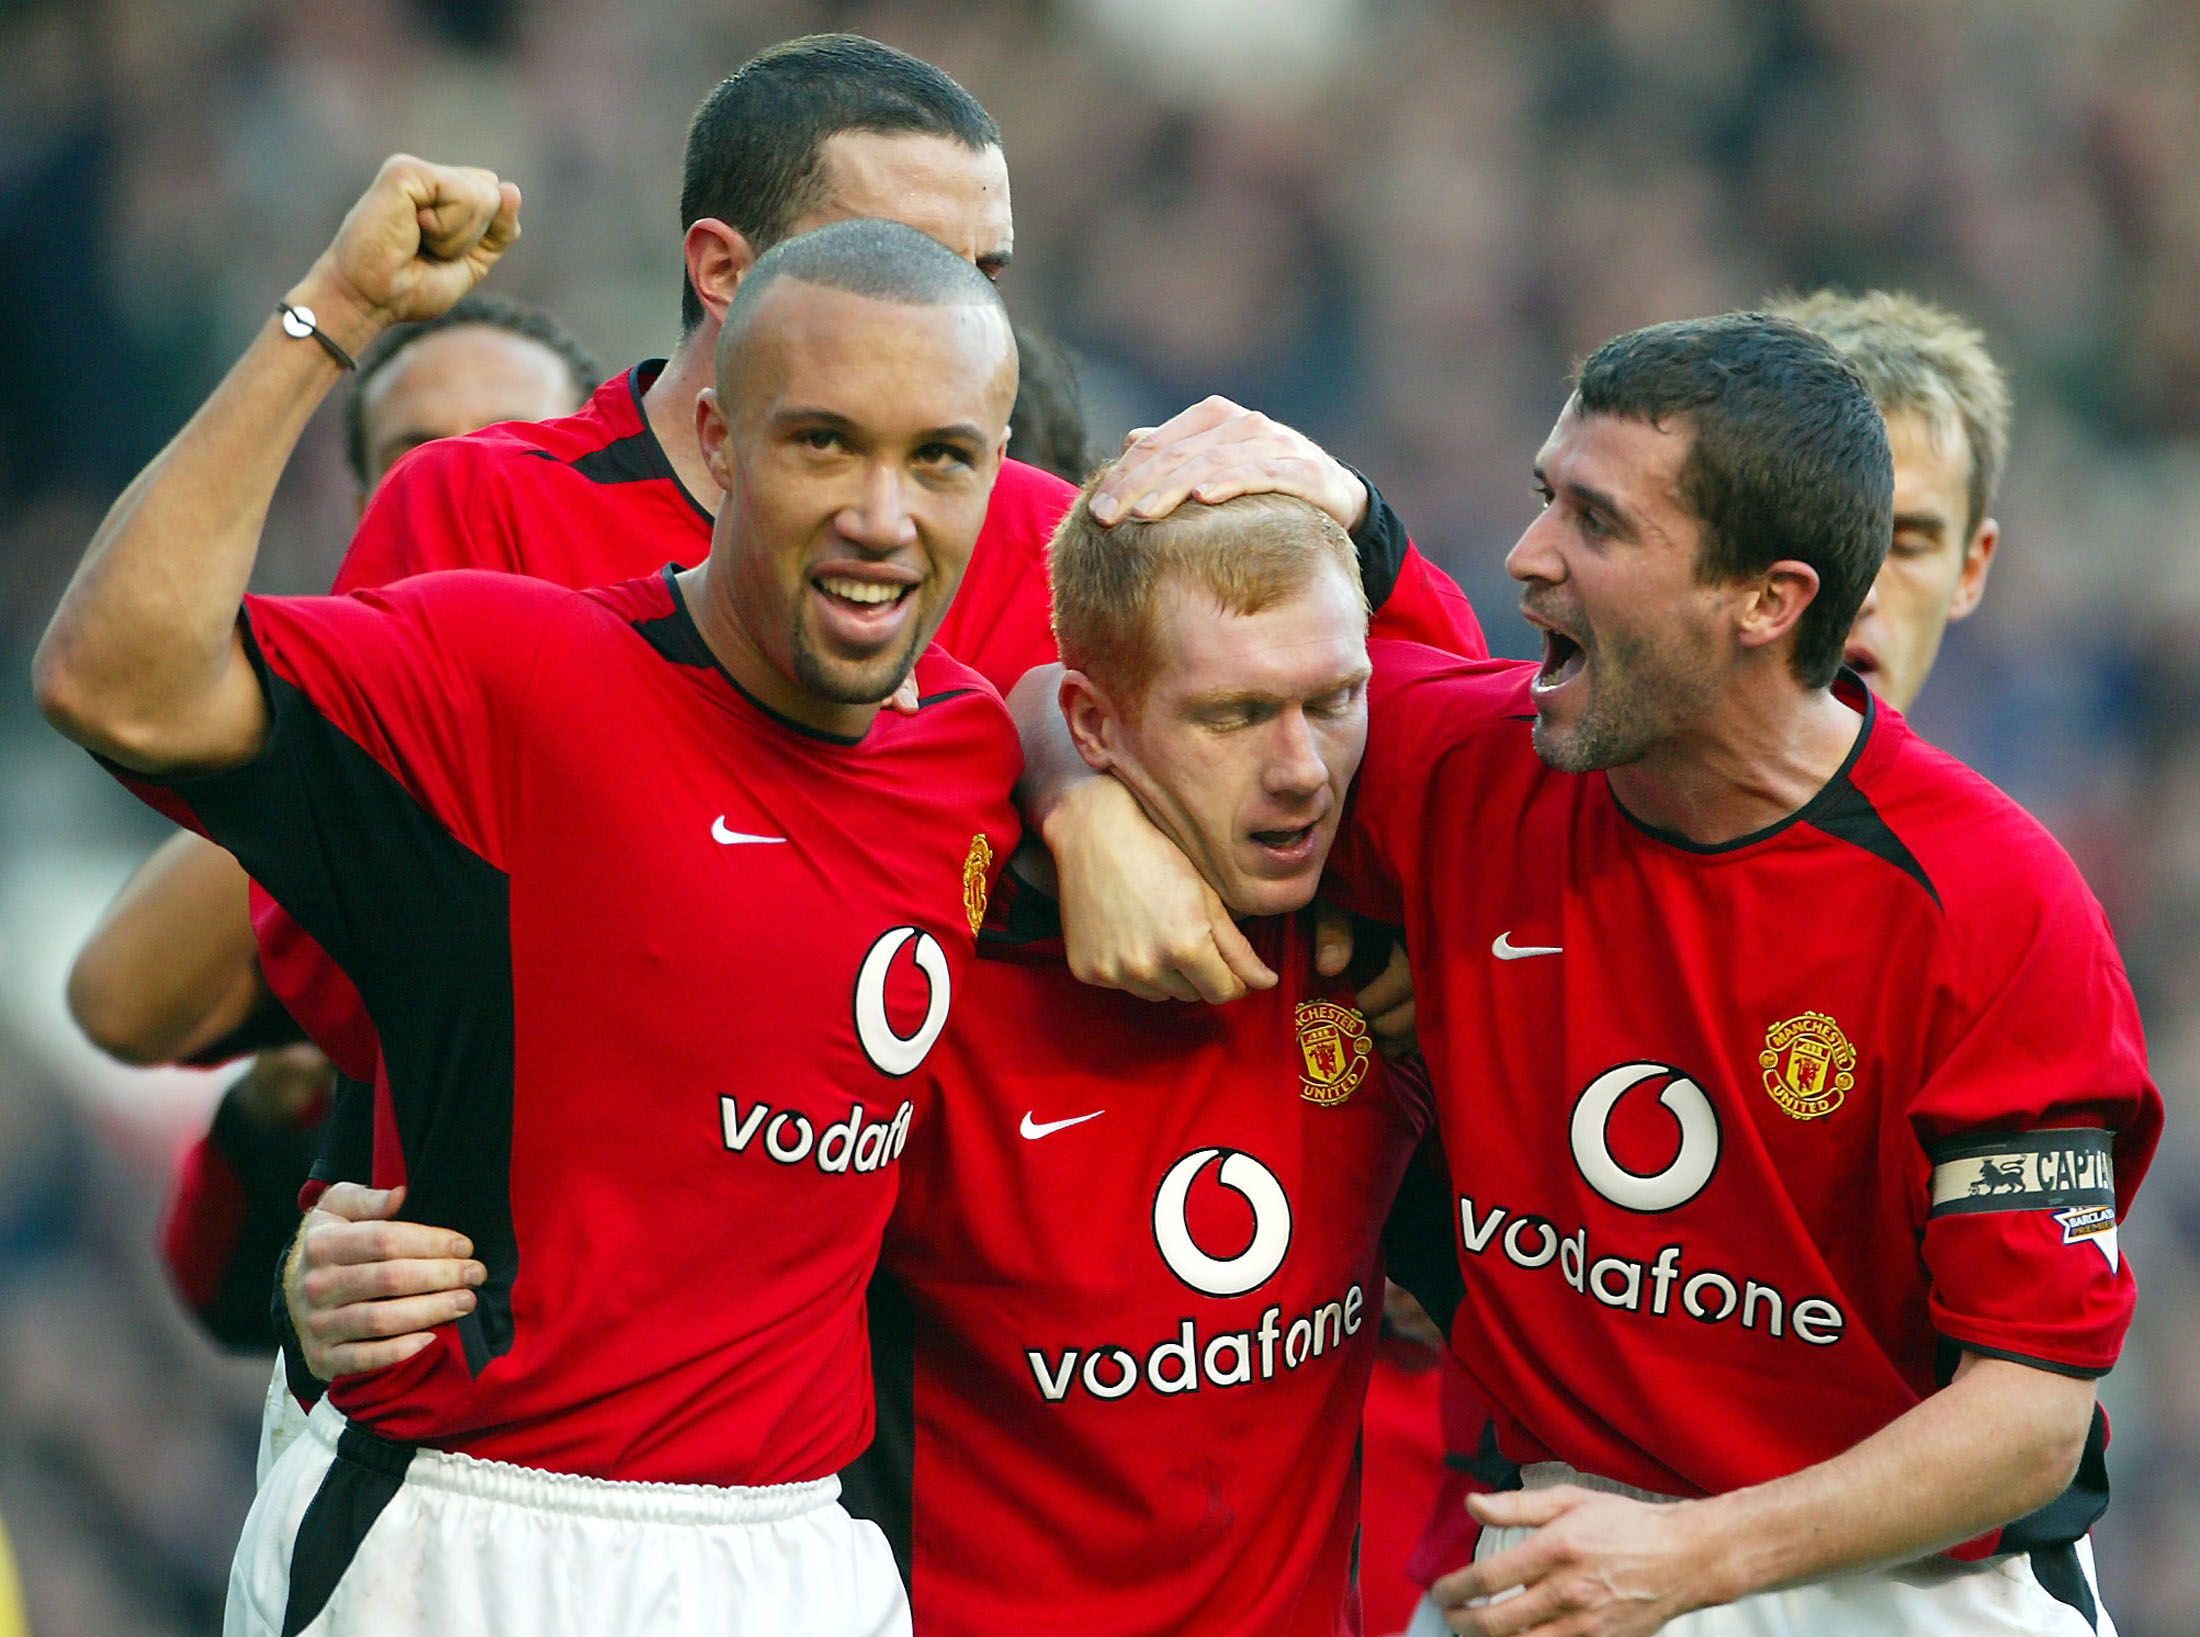 Mikael Silvestre has named his 'perfect XI' of former teammates &amp; it's unreal. Roy Keane and Paul Scholes feature.